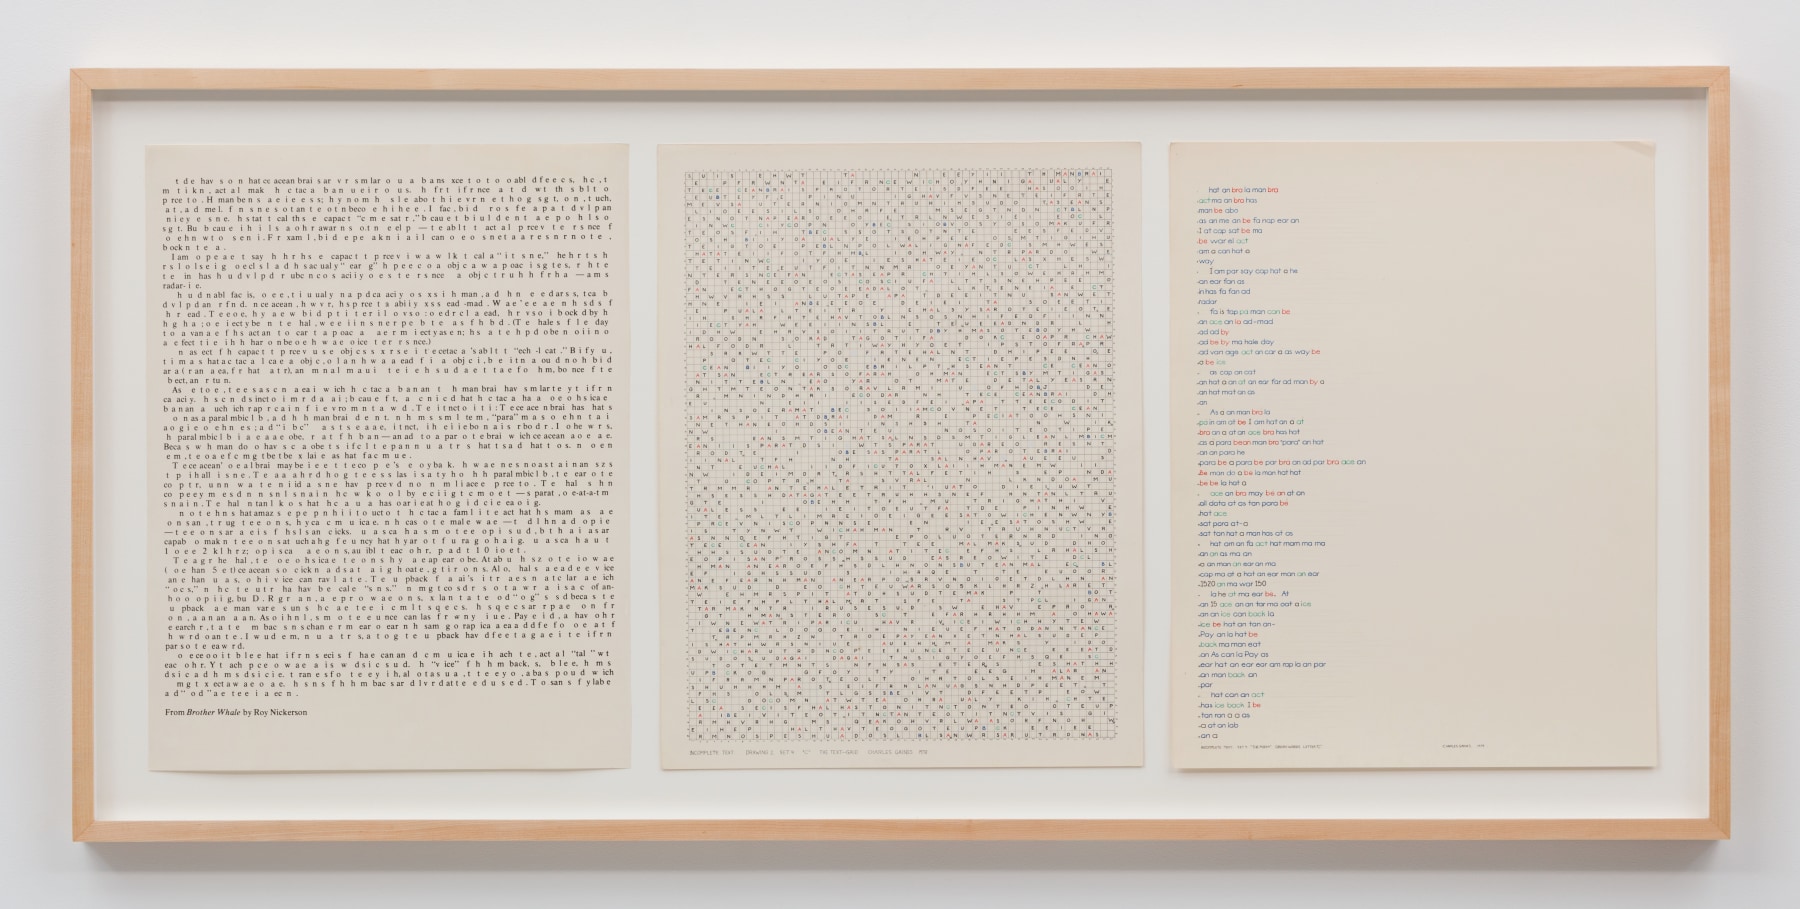 Three sheets of text displayed in a wooden frame.